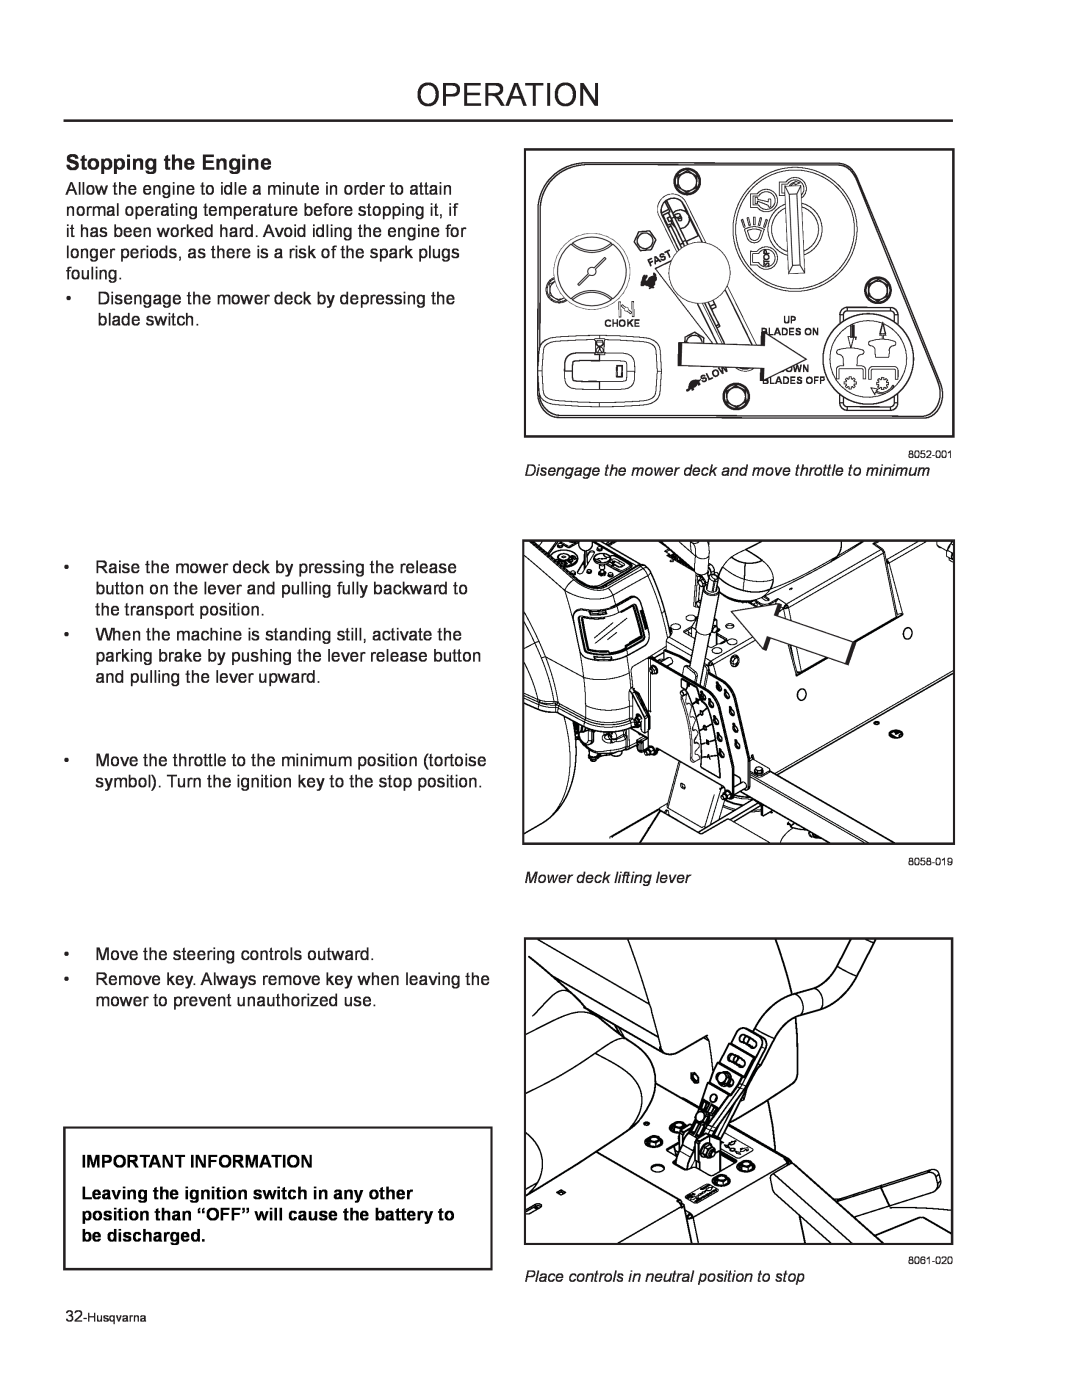 Husqvarna 115 127127 IR, 965881401, 965881301, 965881201, 965881101 Stopping the Engine, operation, Important Information 